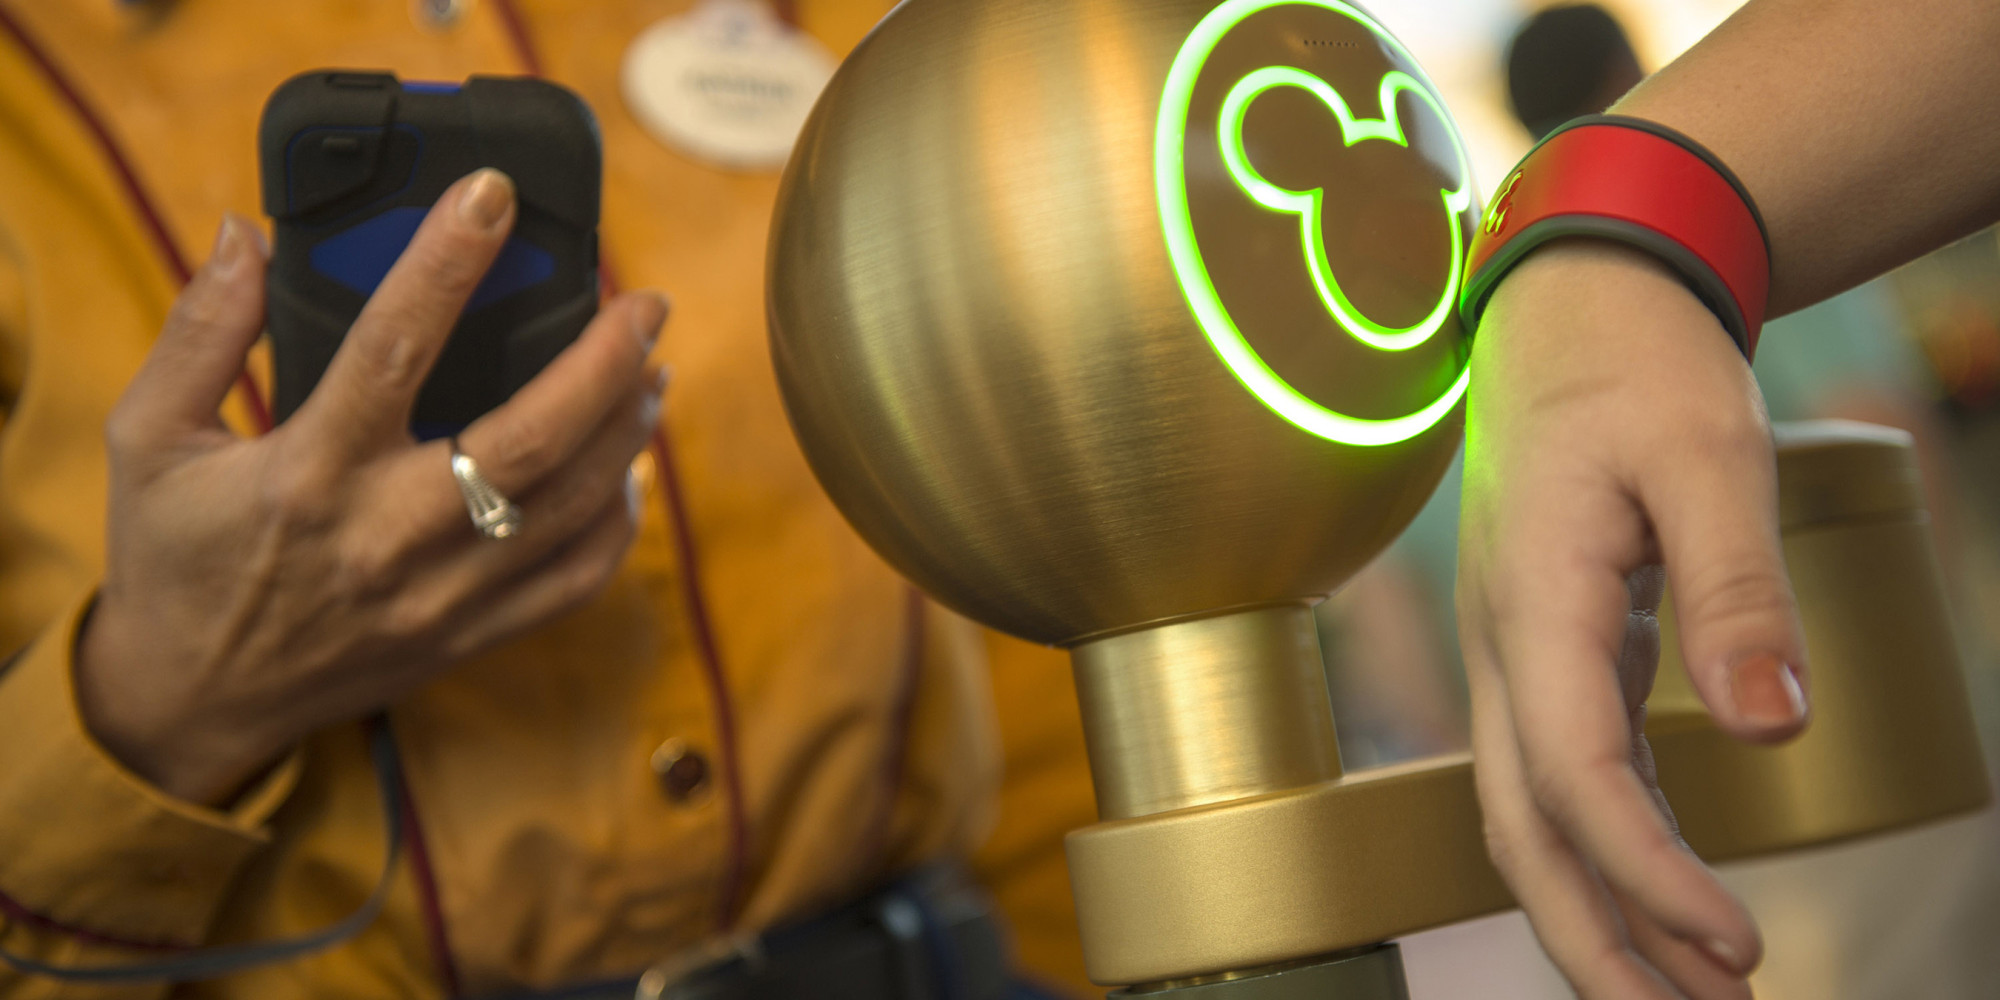 FastPass+ Everything You Need To Know About Walt Disney World's New